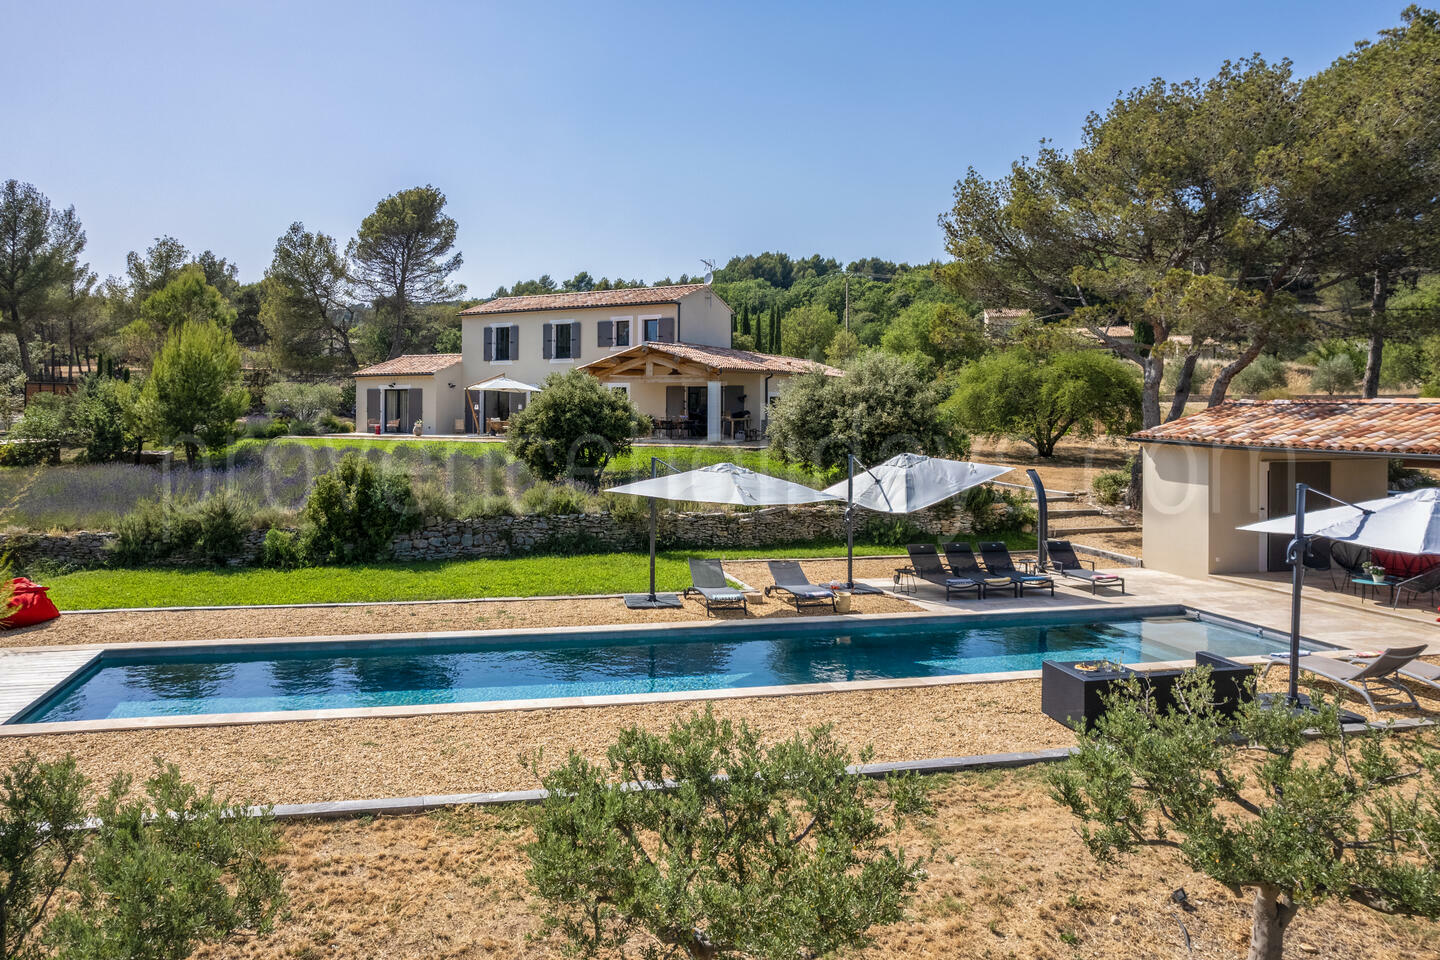 Charming Holiday Rental with Heated Pool in the Luberon Maison Poulinas: Villa - 1